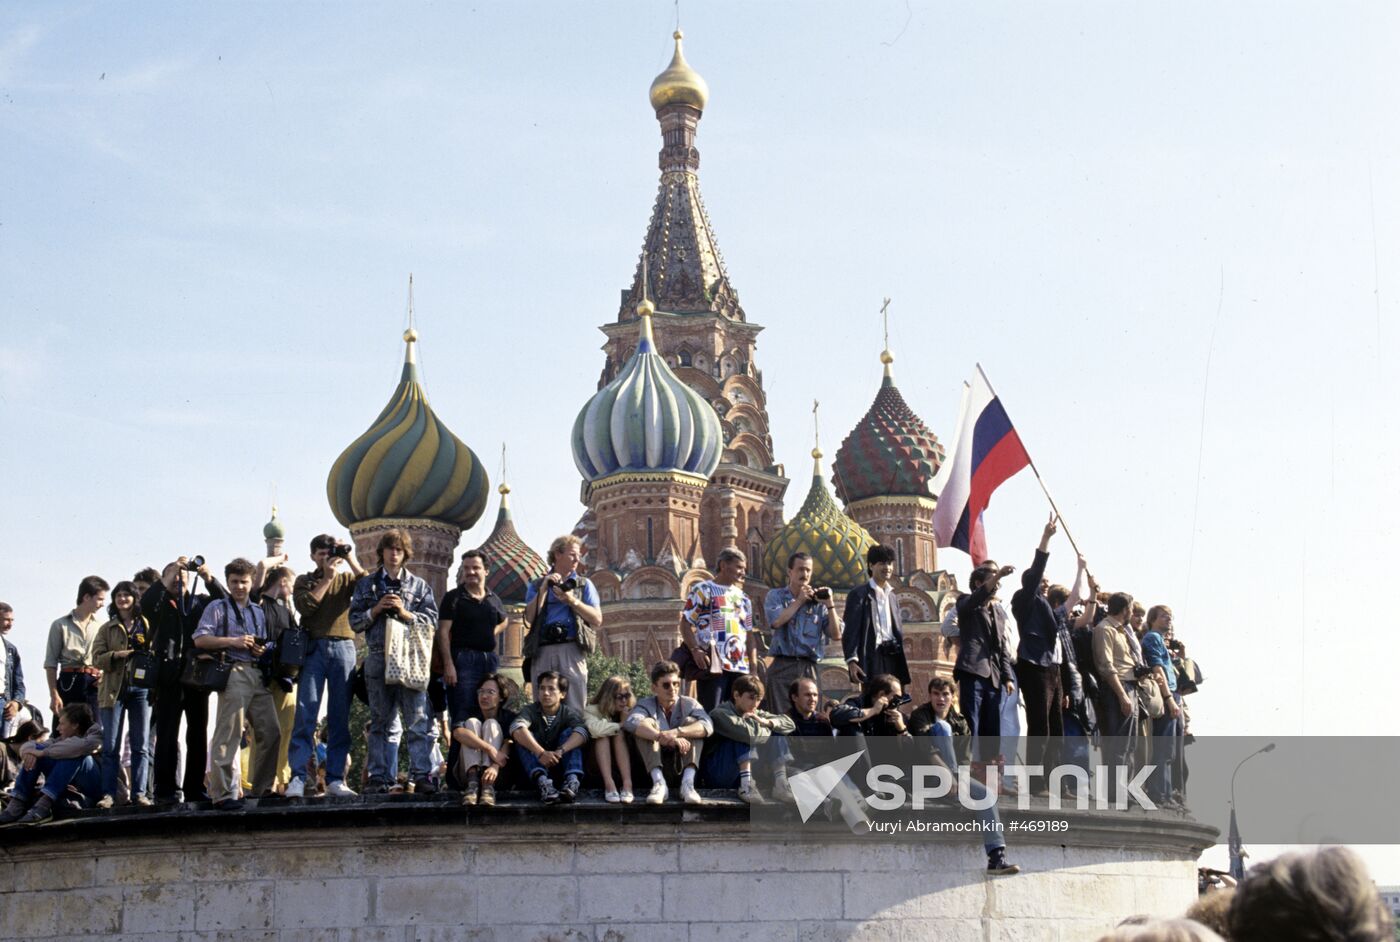 Muscovites rallying on Red square